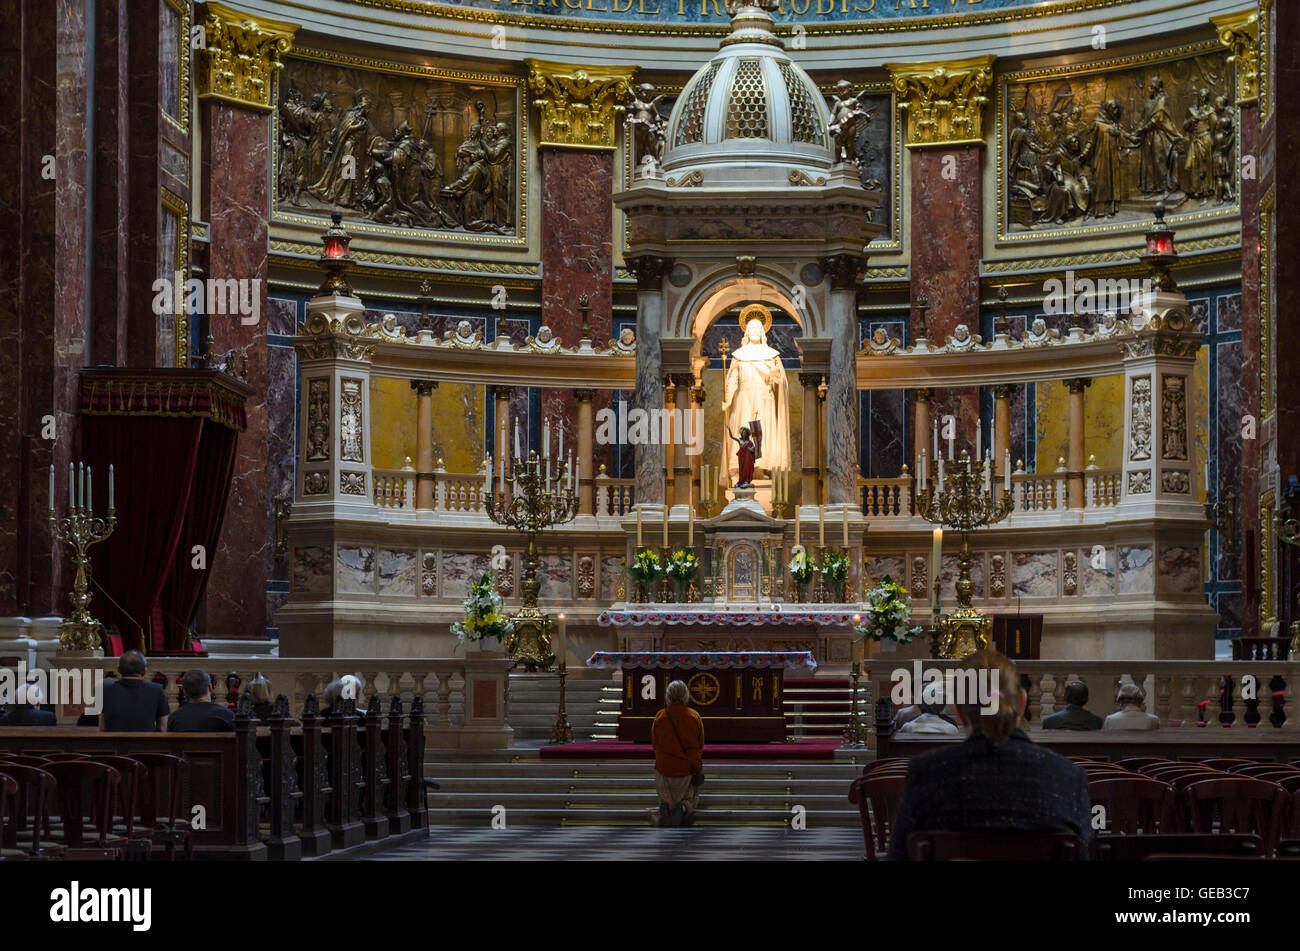 Budapest: St. Stephen's Basilica ( Szent Istvan bazilika ) with statue of St. Stephan in high altar, Hungary, Budapest, Stock Photo